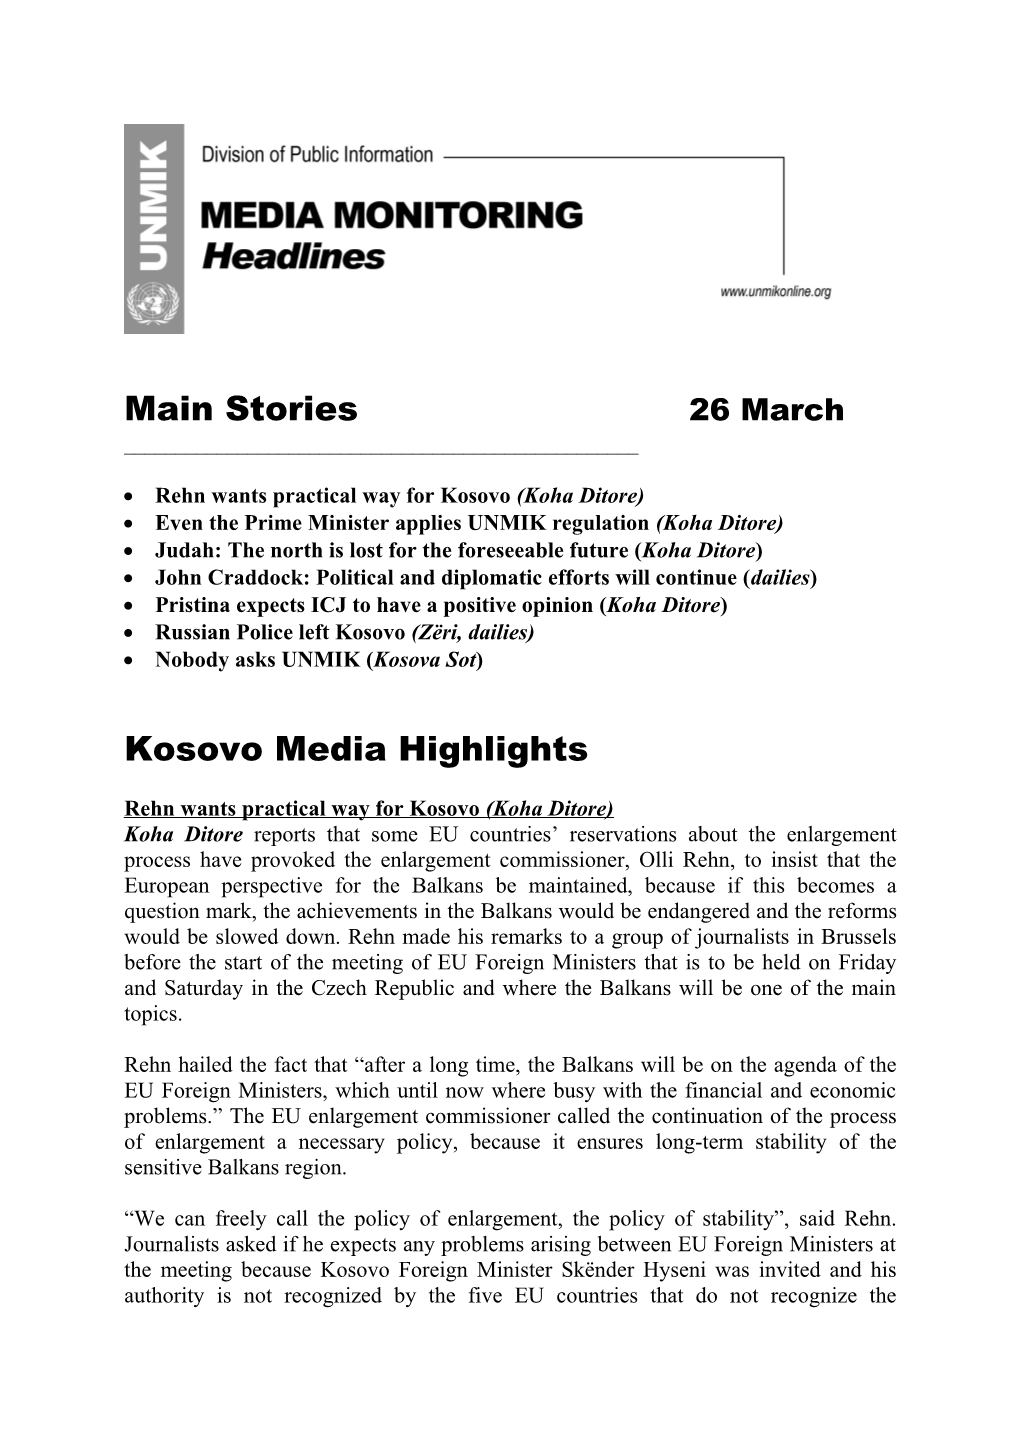 Main Stories 26March